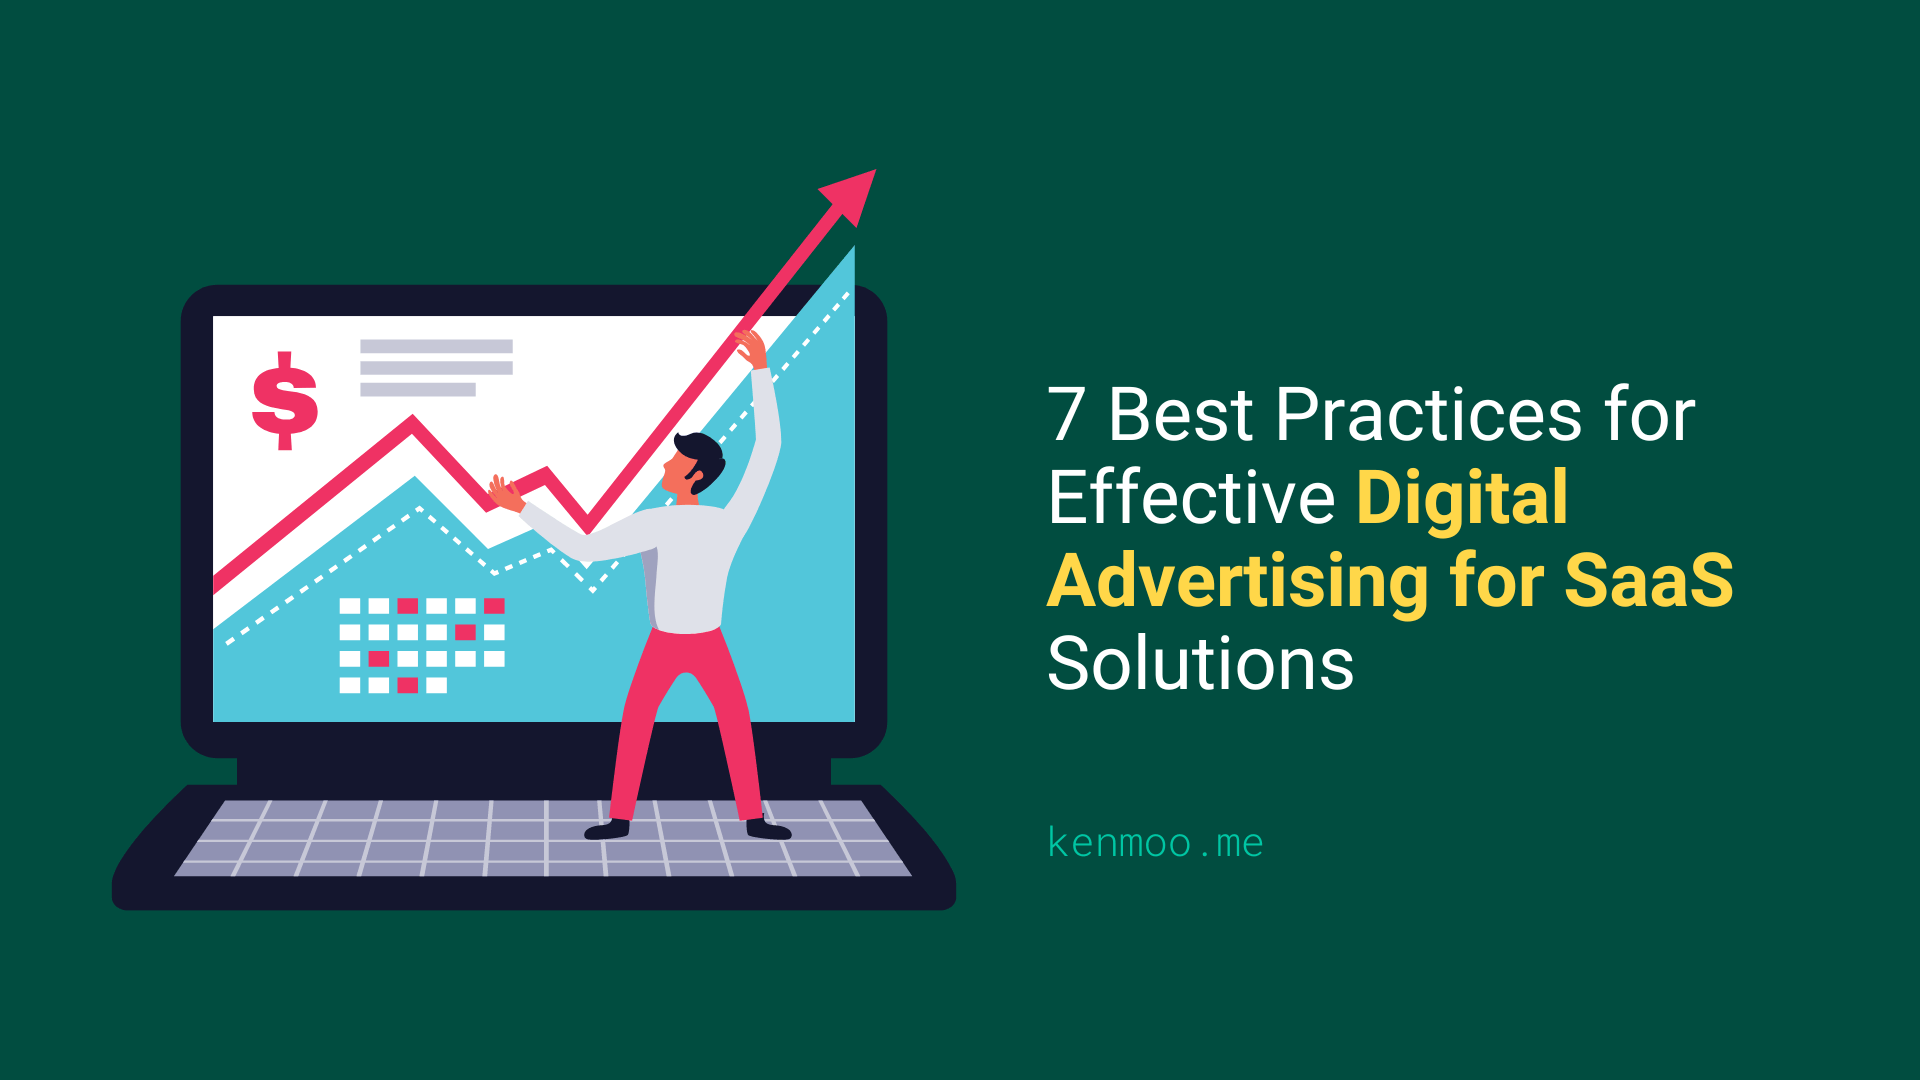 7 Best Practices for Effective Digital Advertising for SaaS Solutions